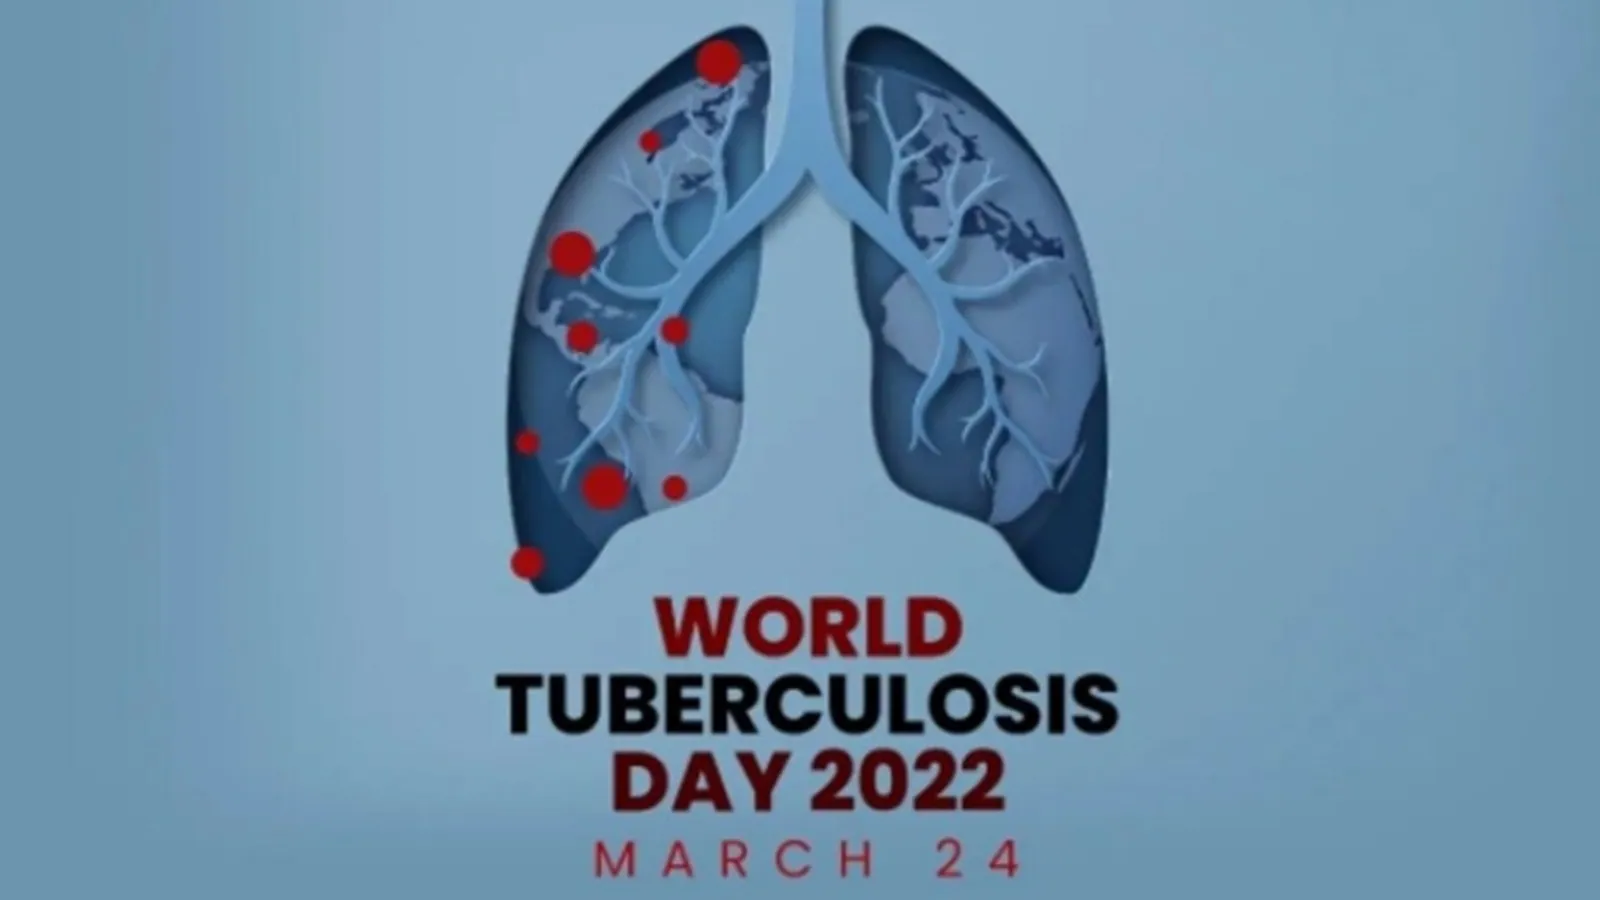 World Tuberculosis Day 2022: Date, theme, history, significance of the day